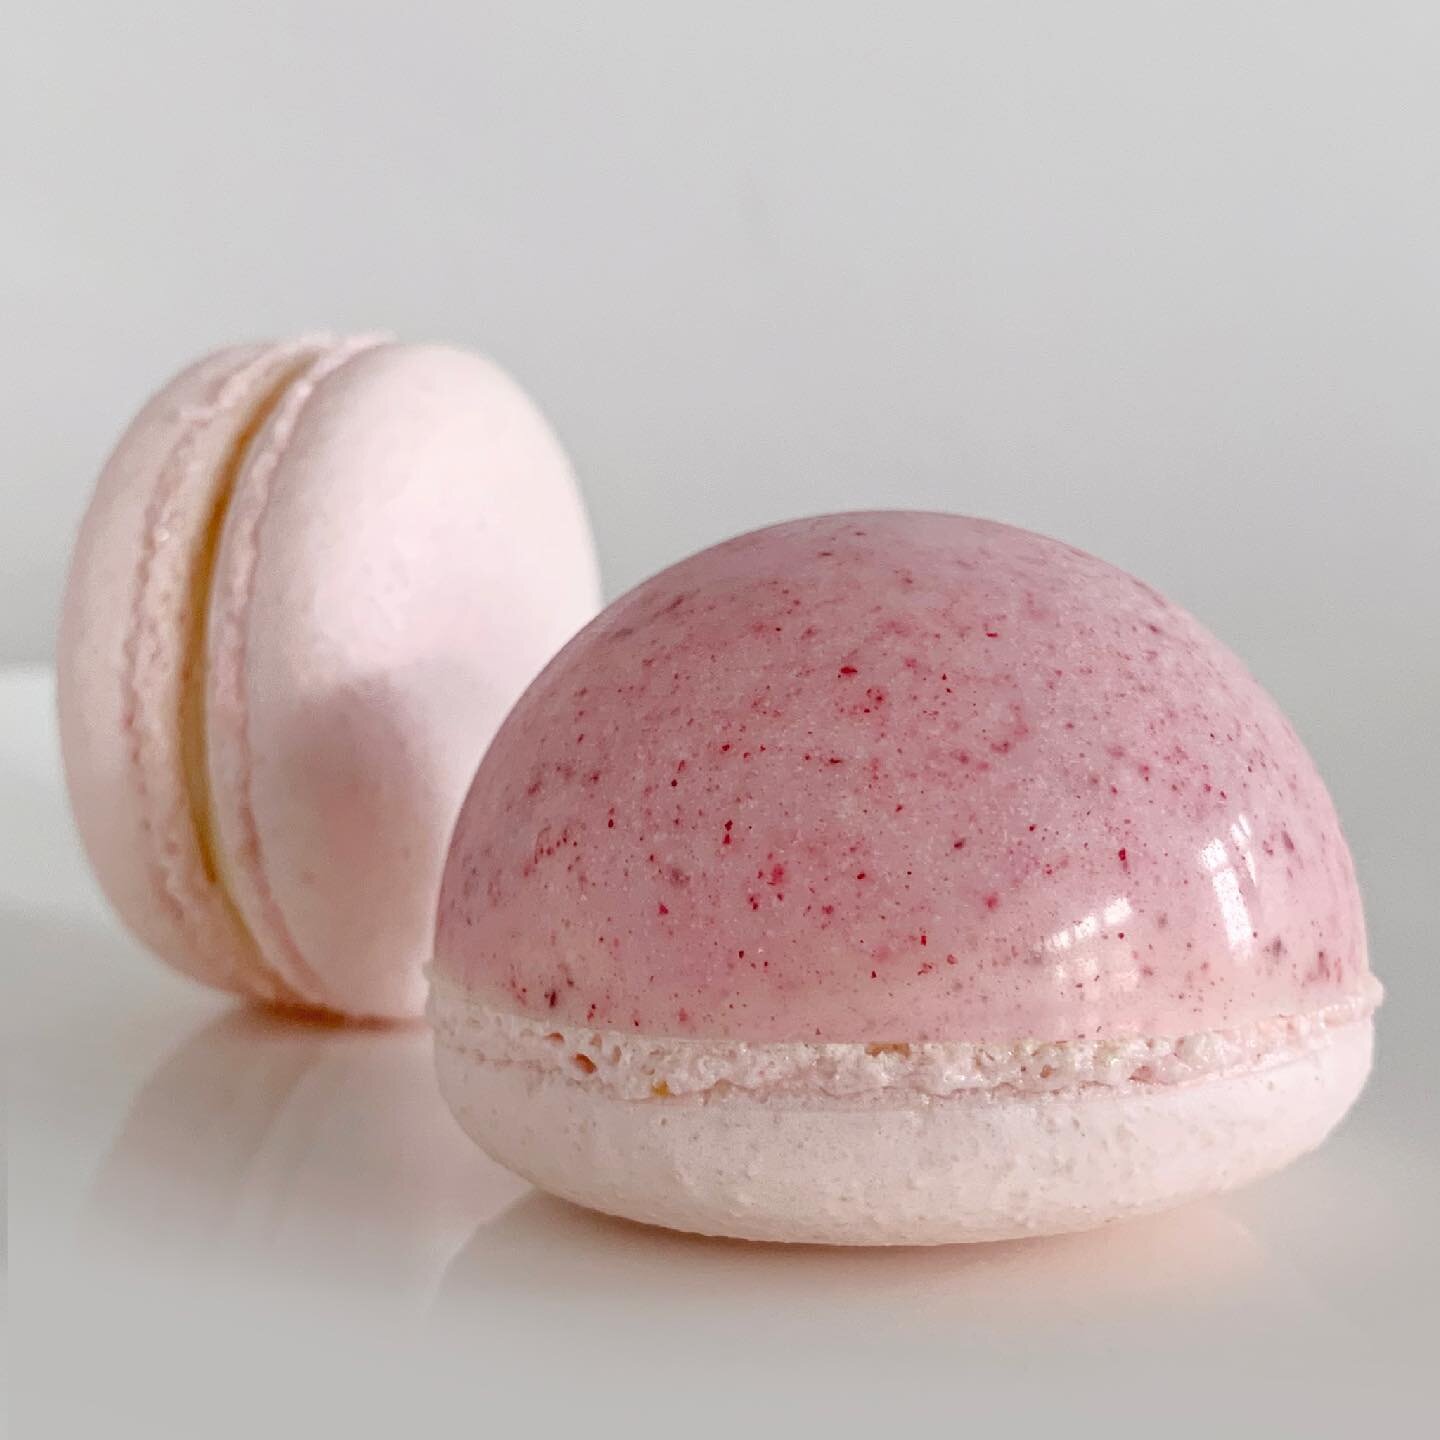 pink lemonade shells x raspberry white chocolate dome + lemon buttercream and raspberry curd
.
.
This was my first week selling macollines instead of macarons. And of course, the baking gods decided that would not be so. I could go into every detail 